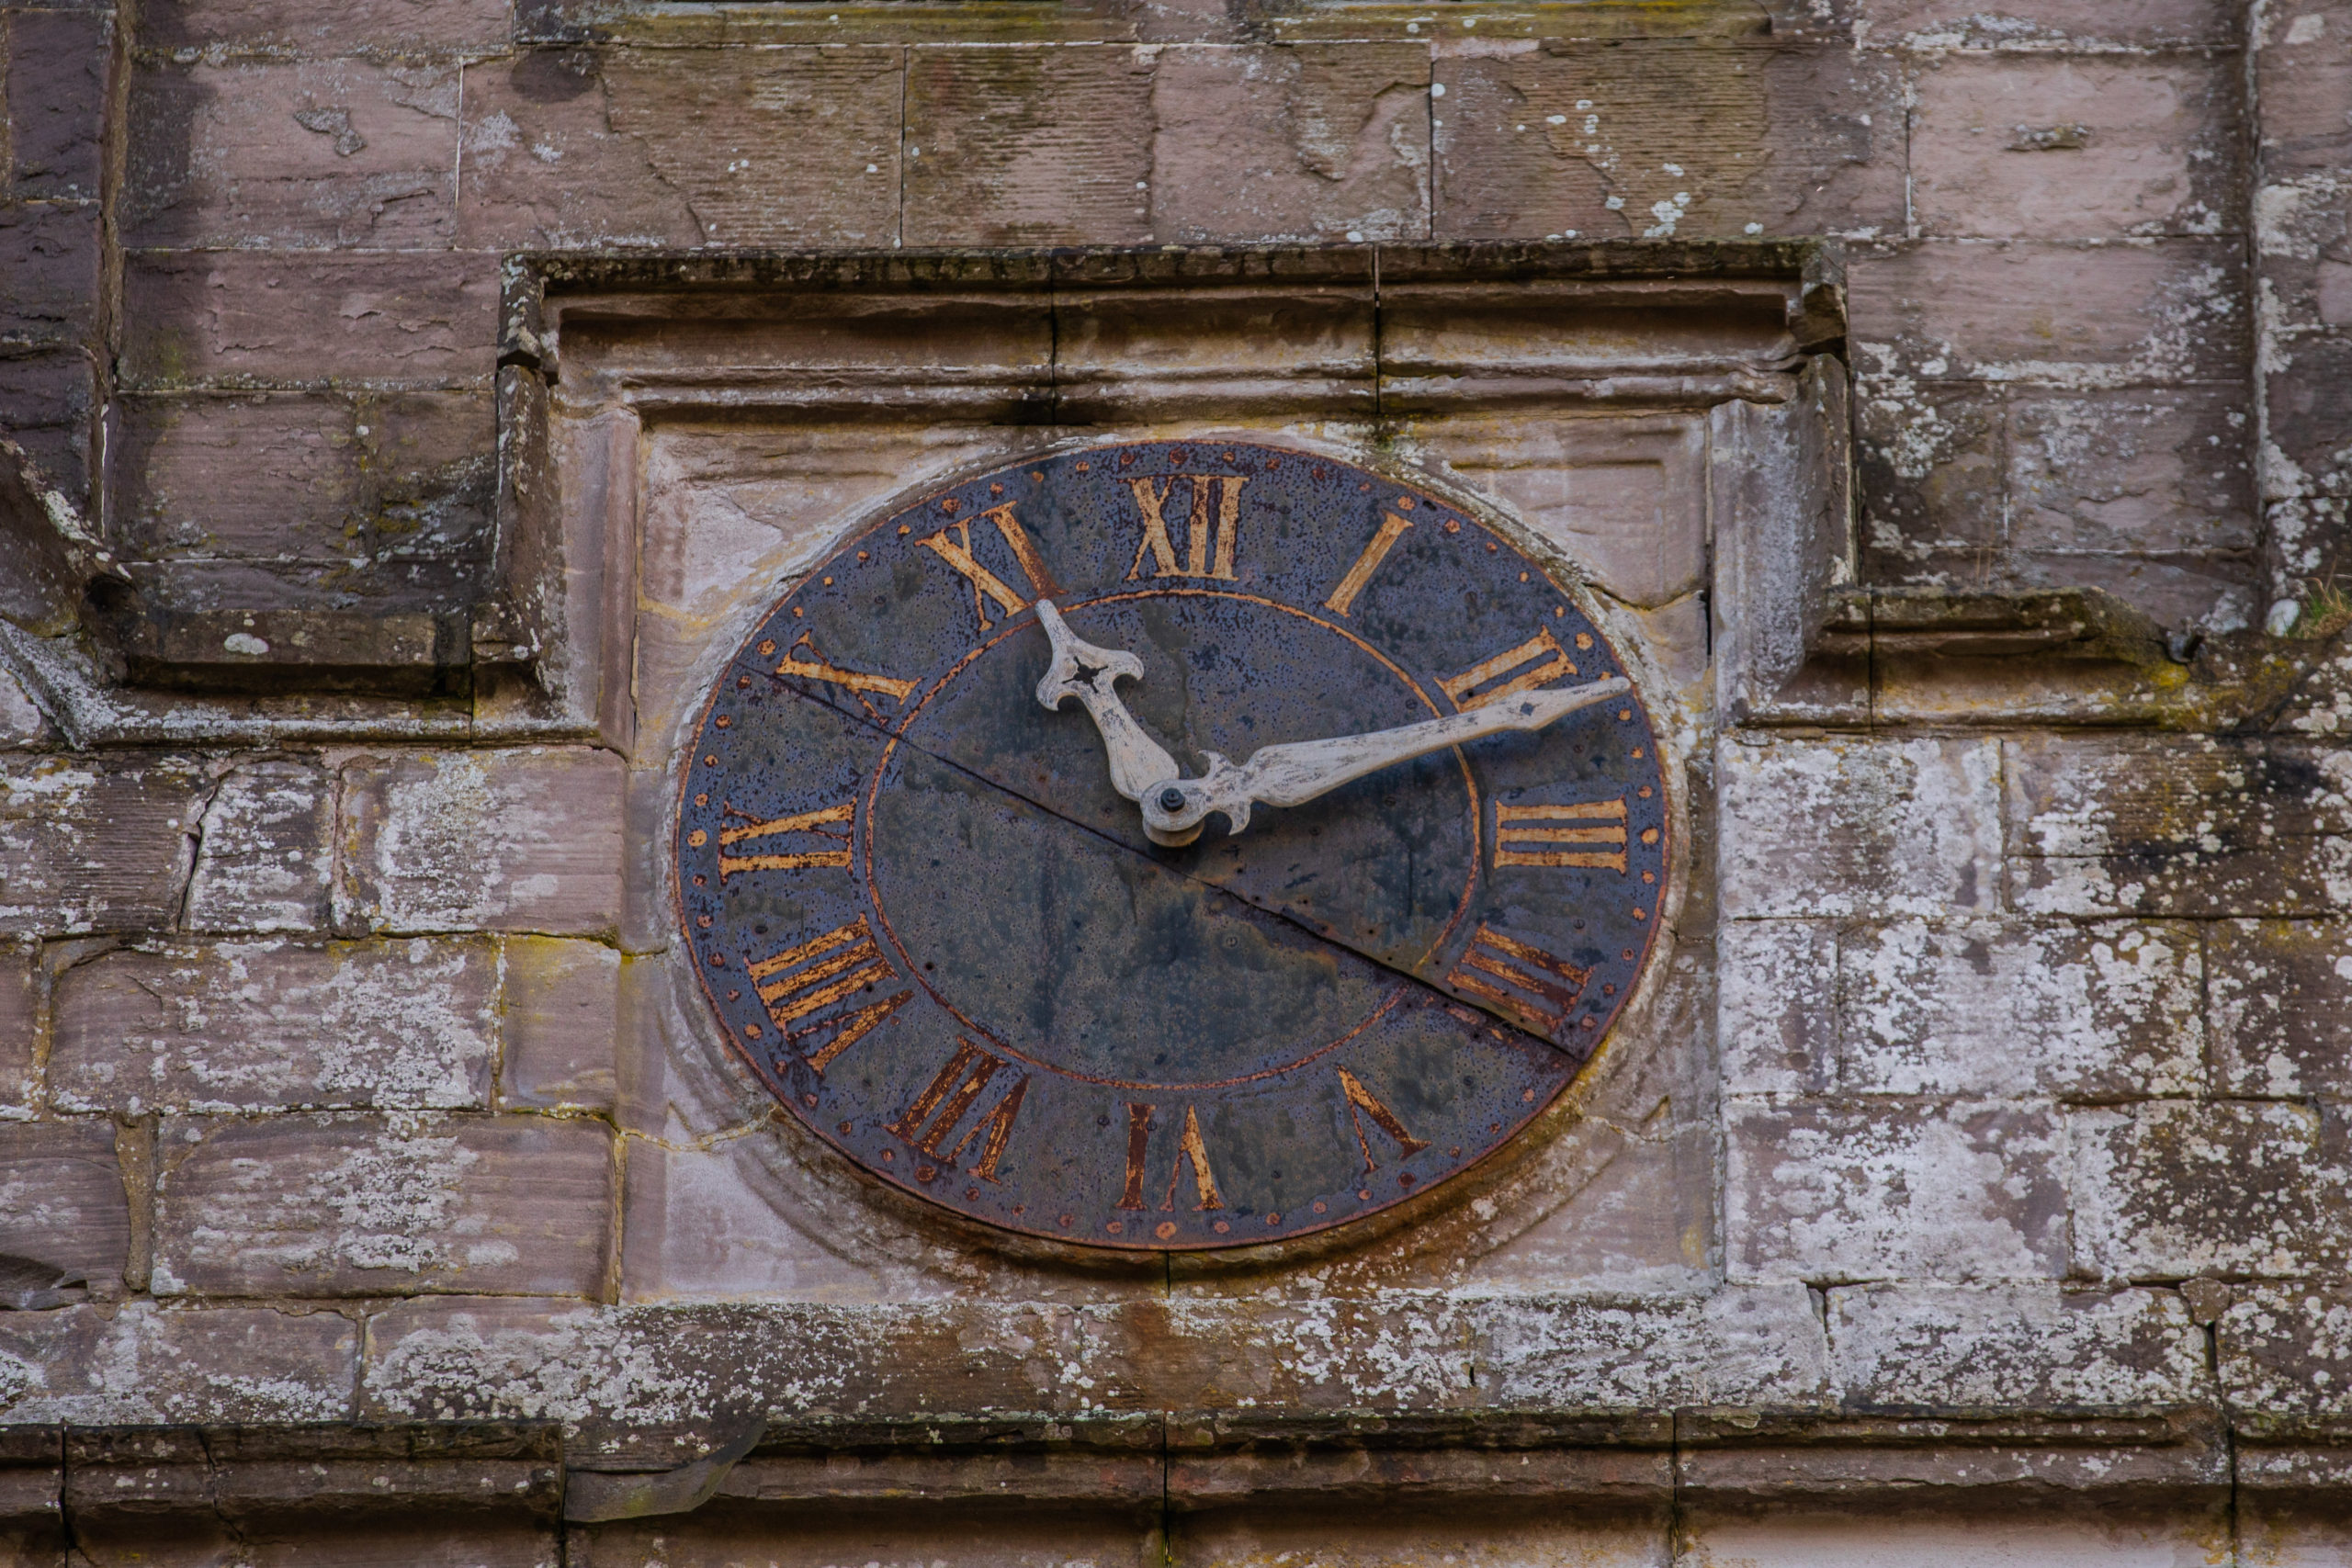 The clock is to be refurbished